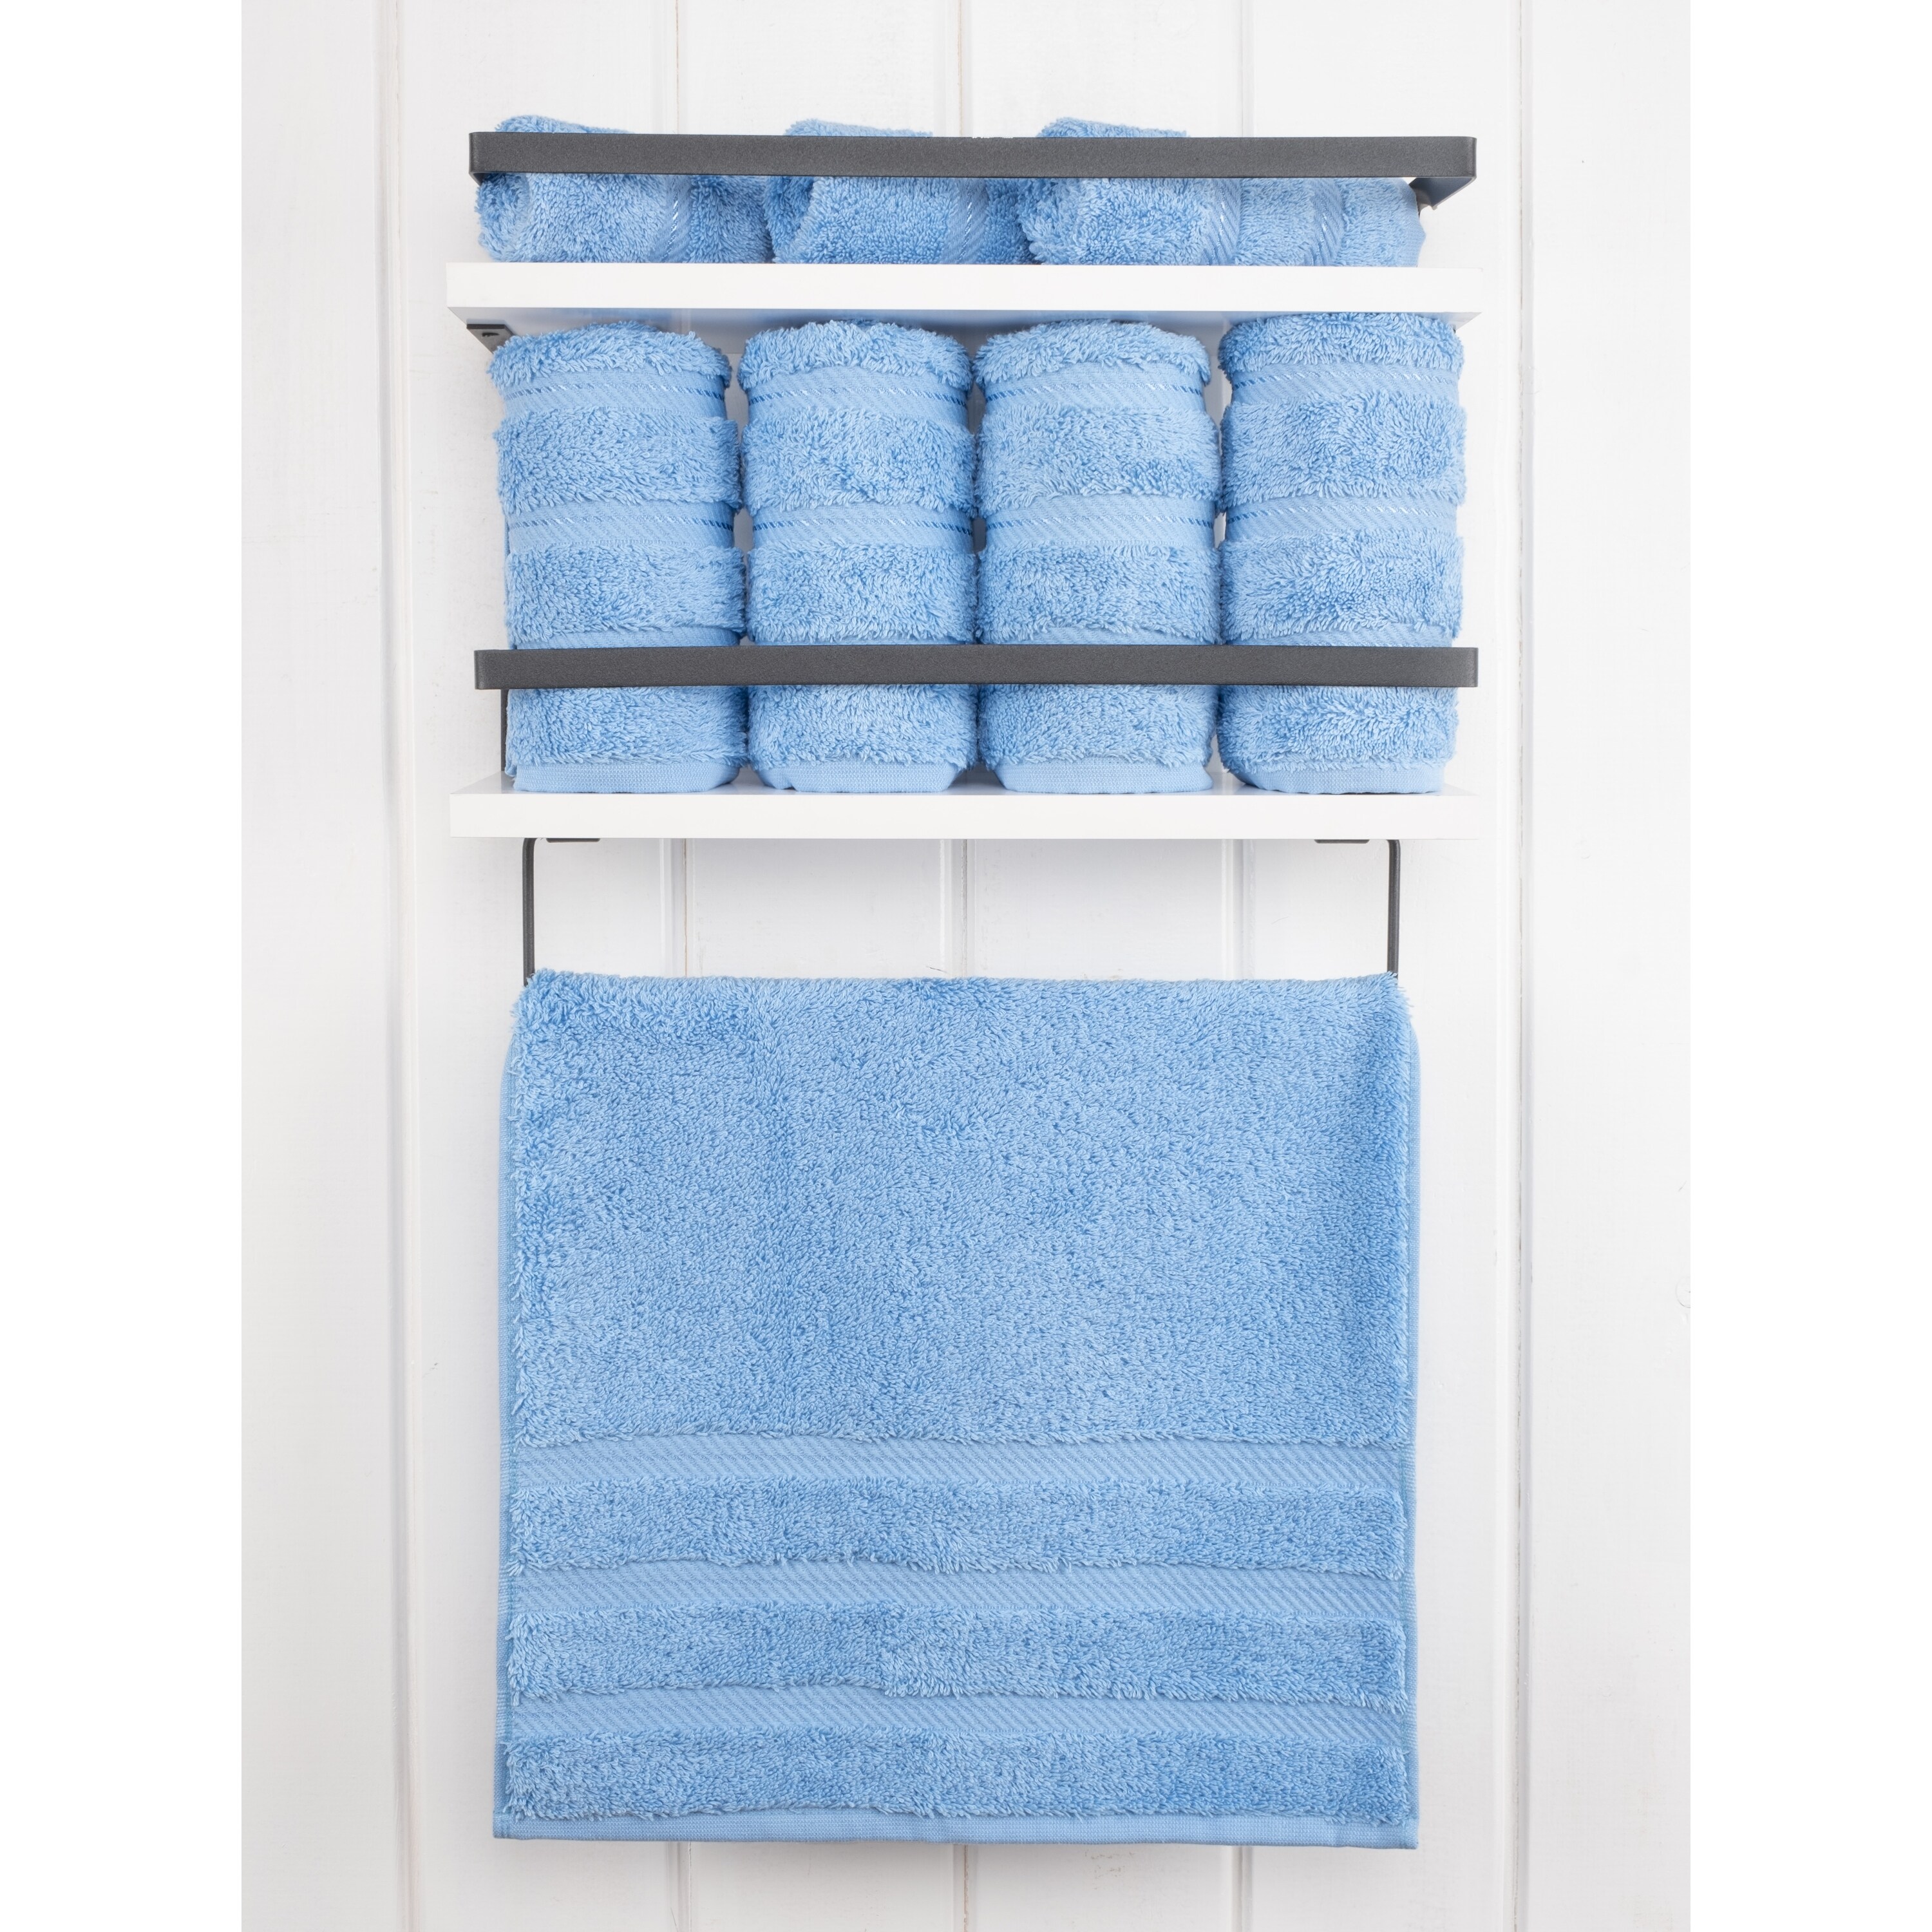 https://ak1.ostkcdn.com/images/products/is/images/direct/50eb0ef43997ff7ffa9108bf5c2f071894bf6724/American-Soft-Linen-4-Piece-Turkish-Hand-Towel-Set.jpg